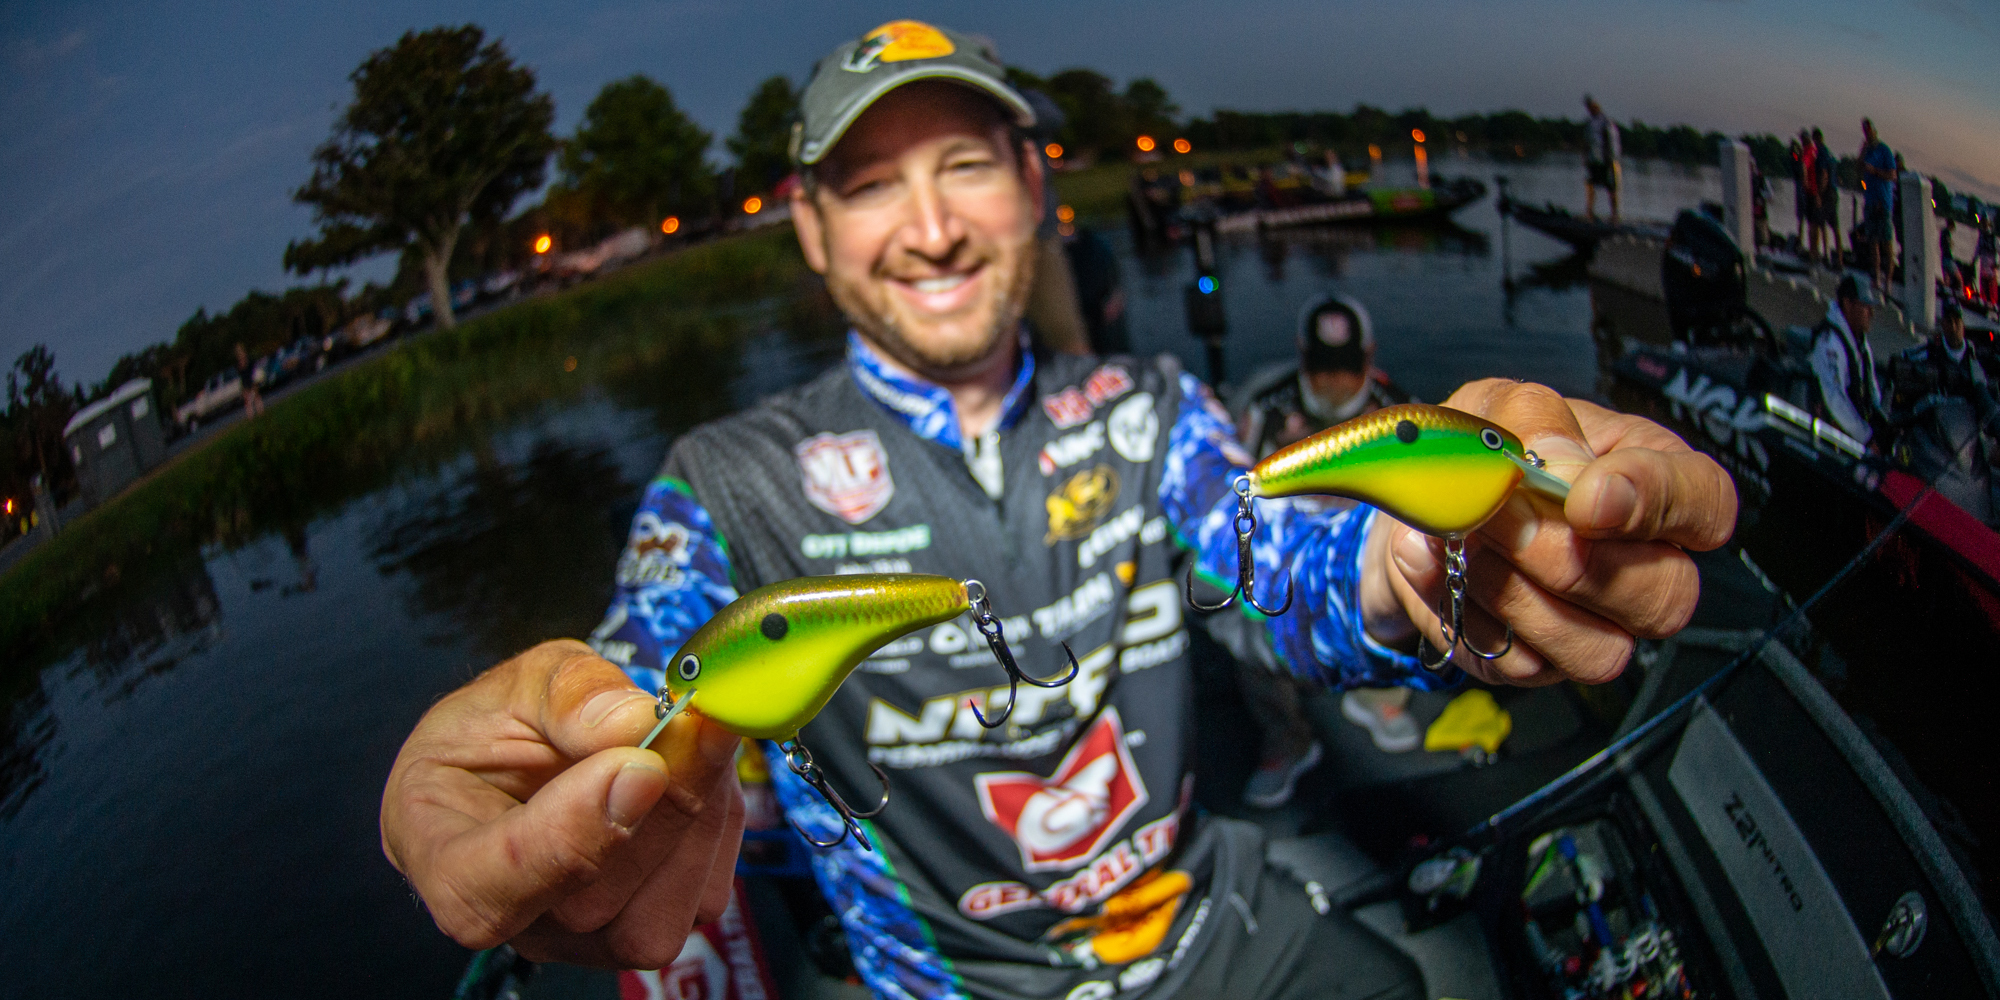 Top 10 Baits and Patterns at the Harris Chain Bass Pro Tour